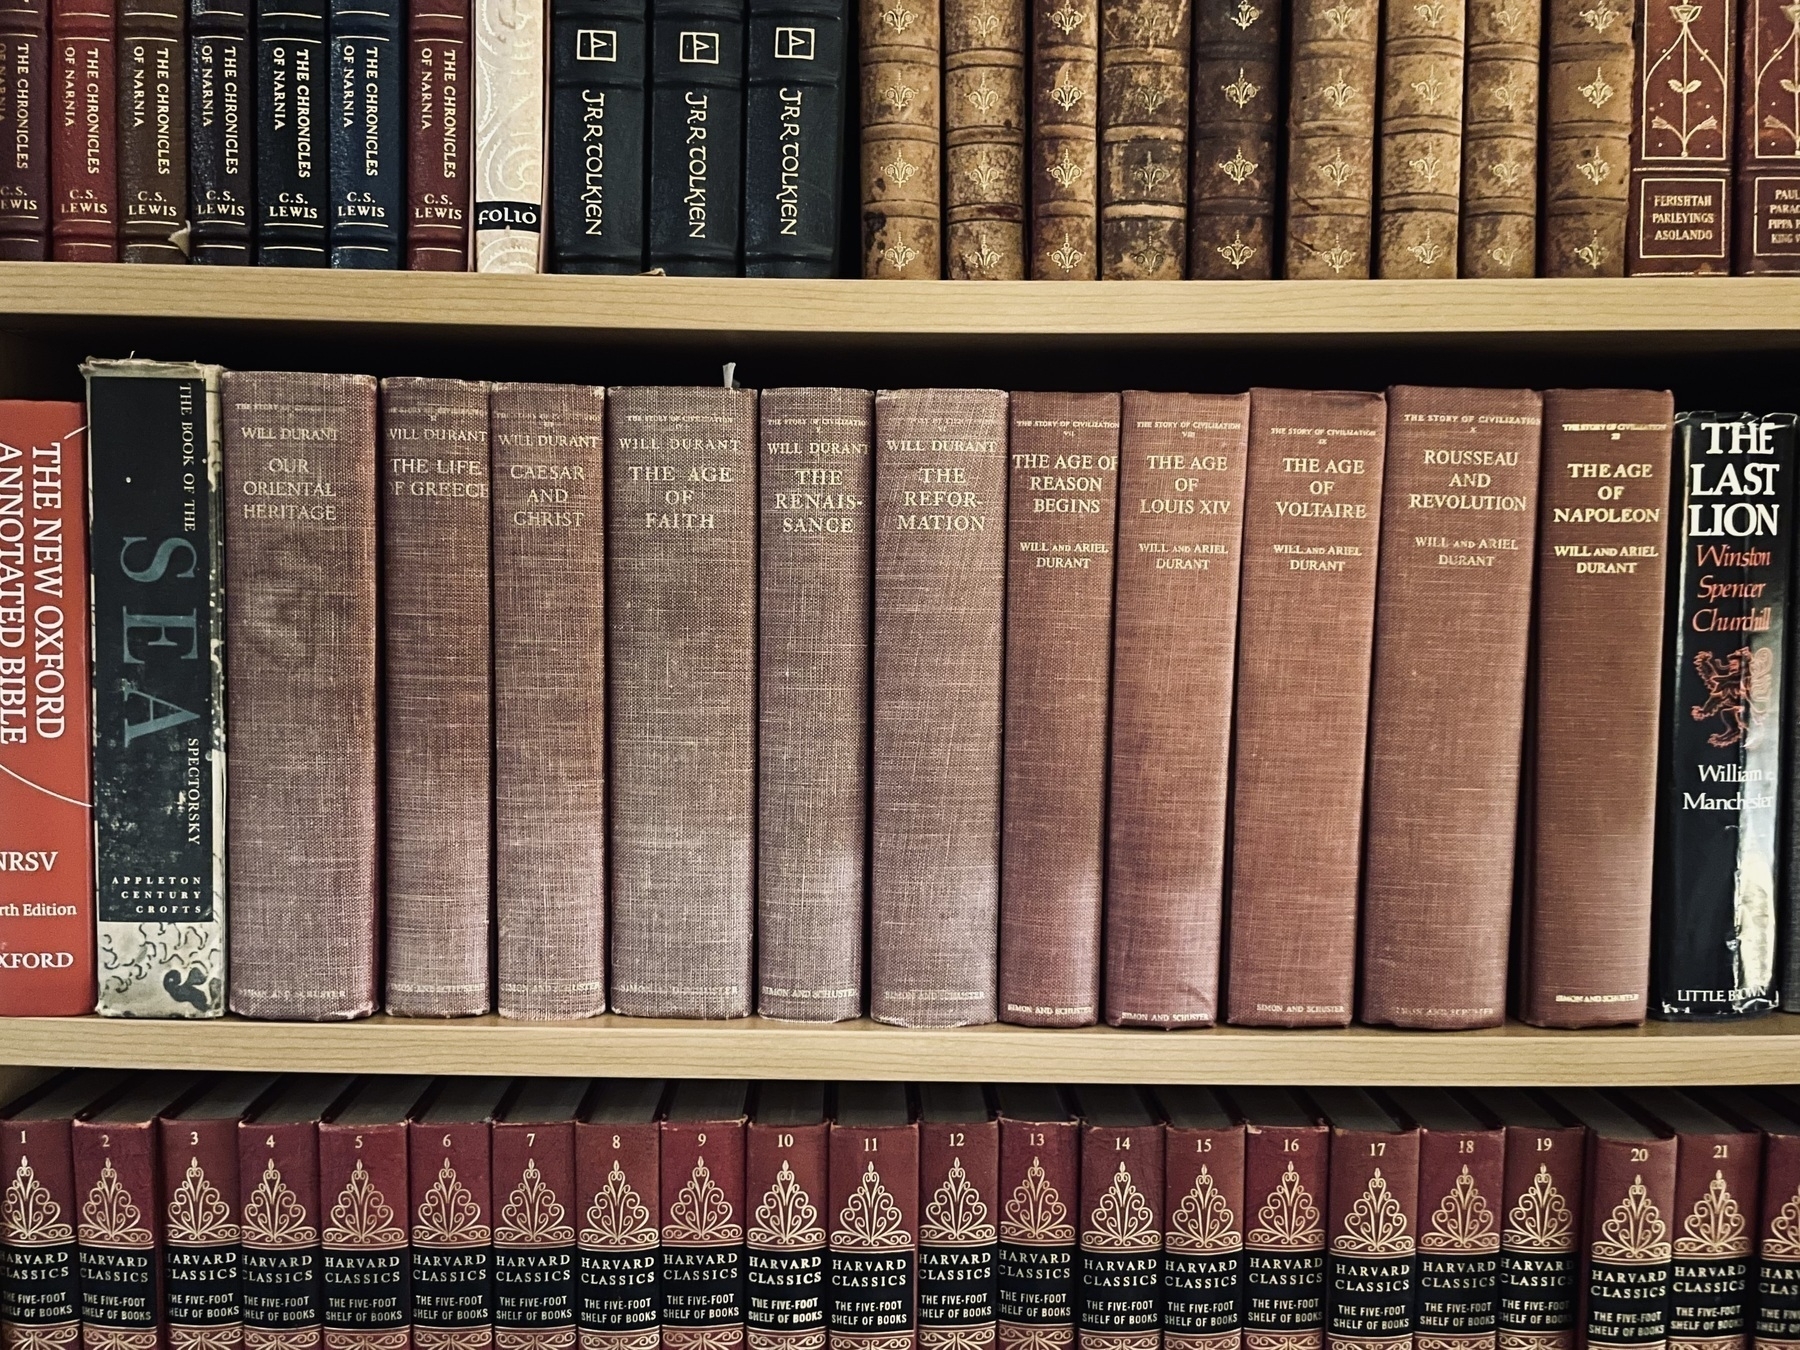 The 11-volume Story of Civilization by Will and Ariel Durant